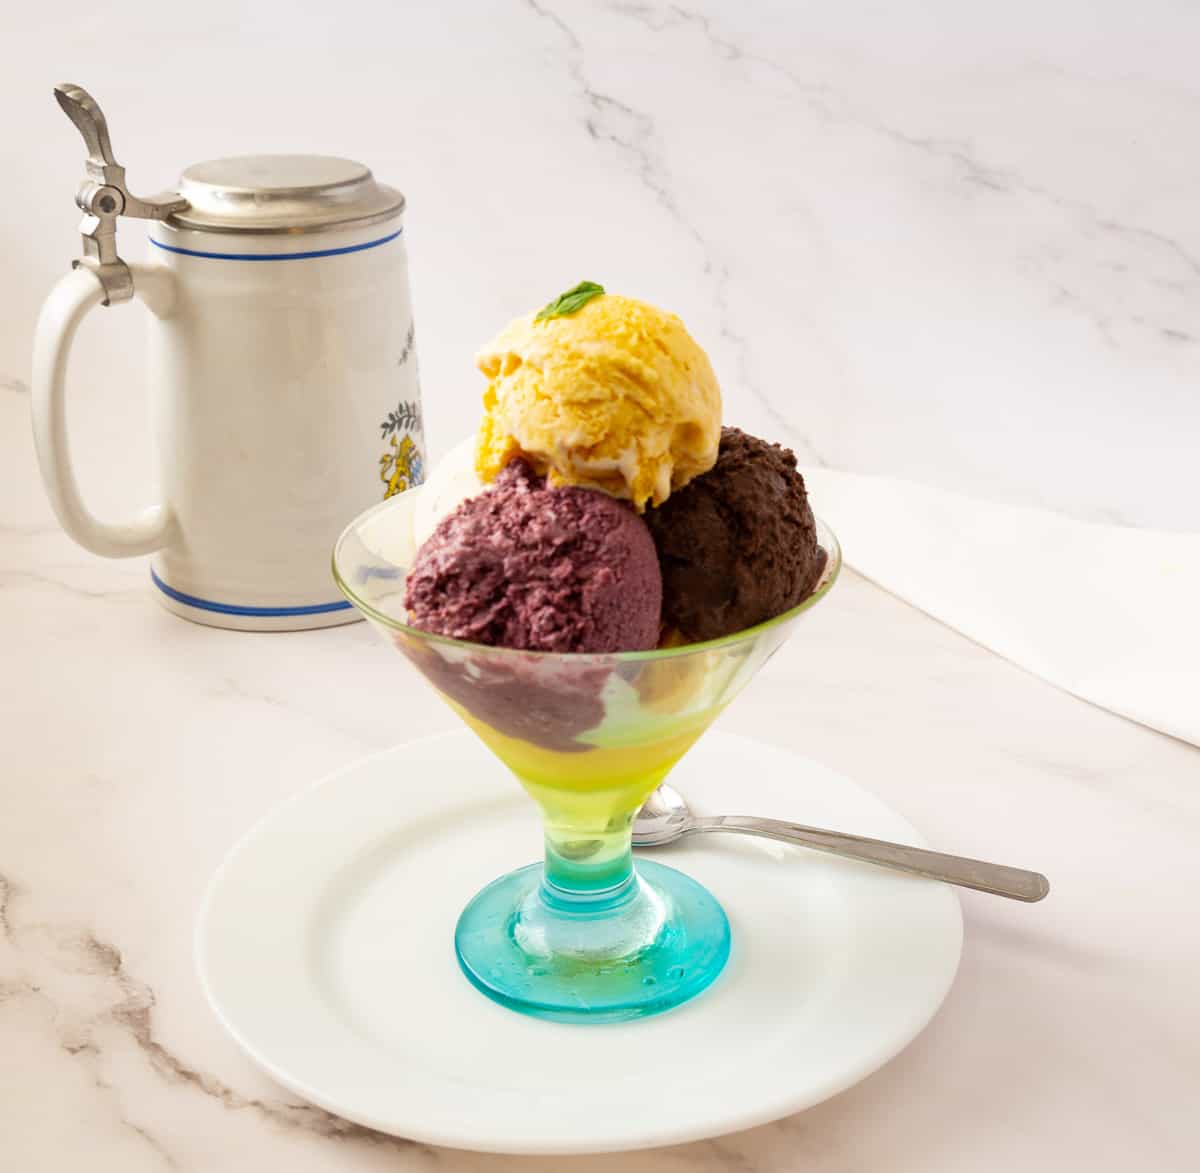 Ice cream scoops in a fancy glass bowl.